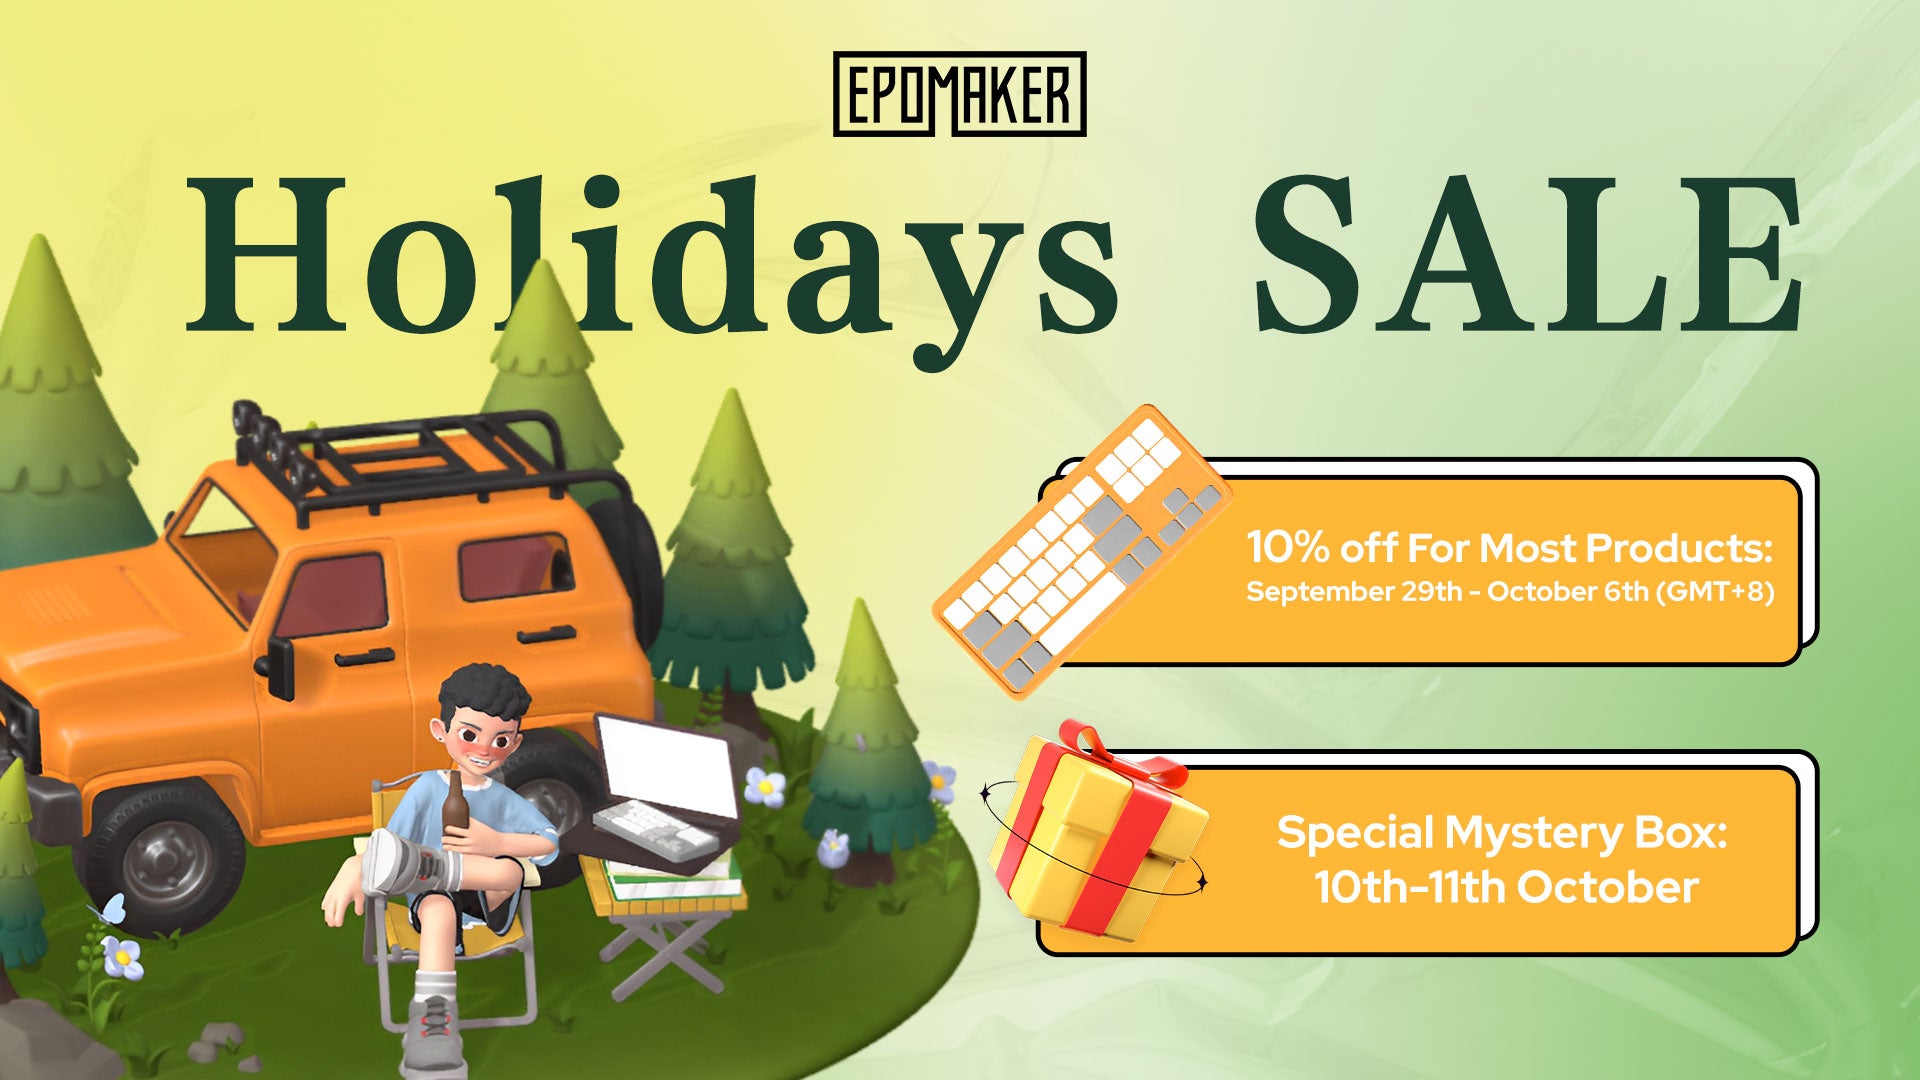 Epomaker Holiday Sales Event Announcement